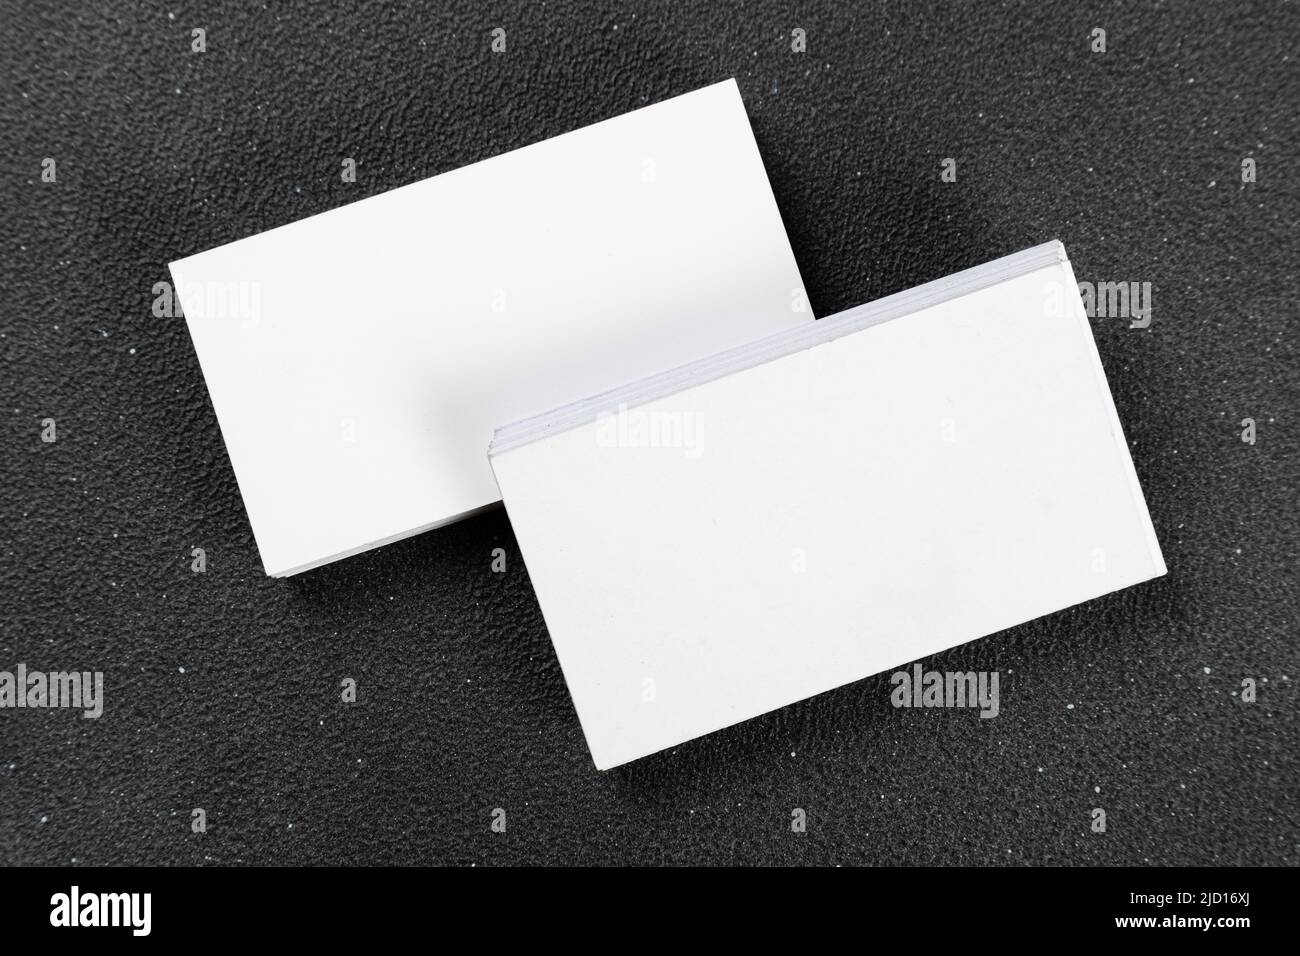 Photos of business cards. Mock-up for corporate identity on a black background. For graphic designers presentations and portfolios Stock Photo